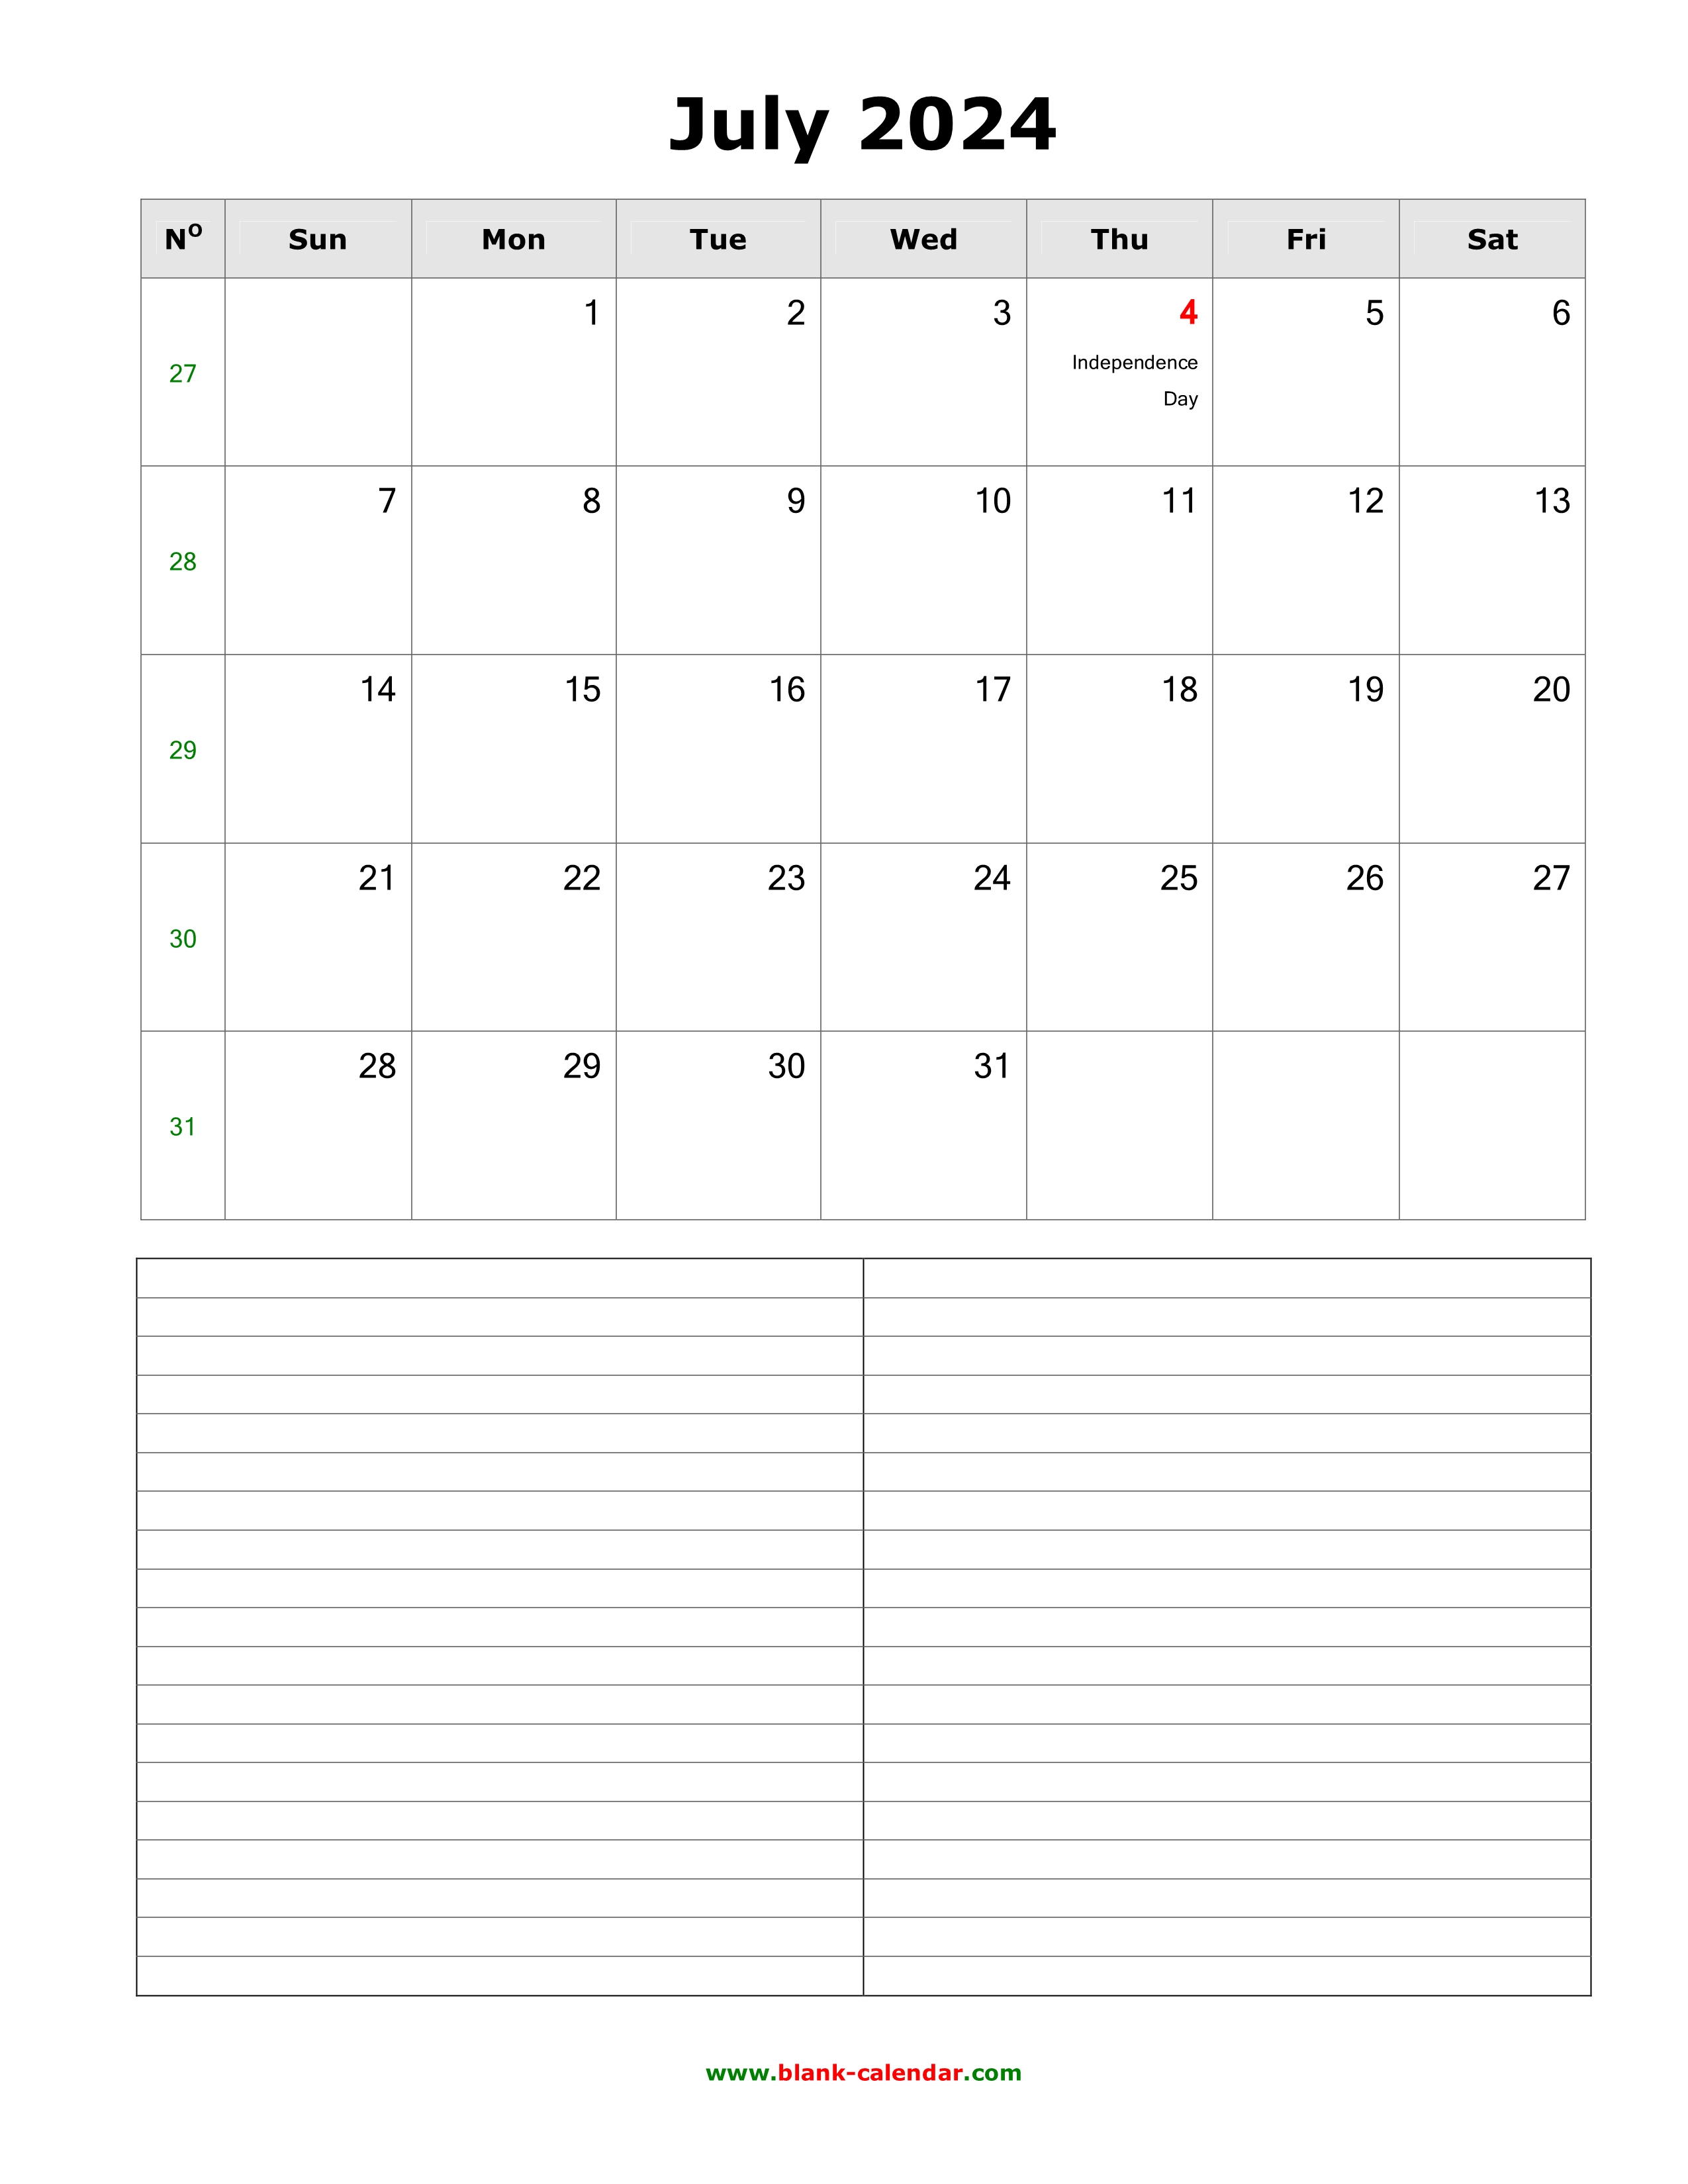 Download July 2024 Blank Calendar with Space for Notes (vertical)